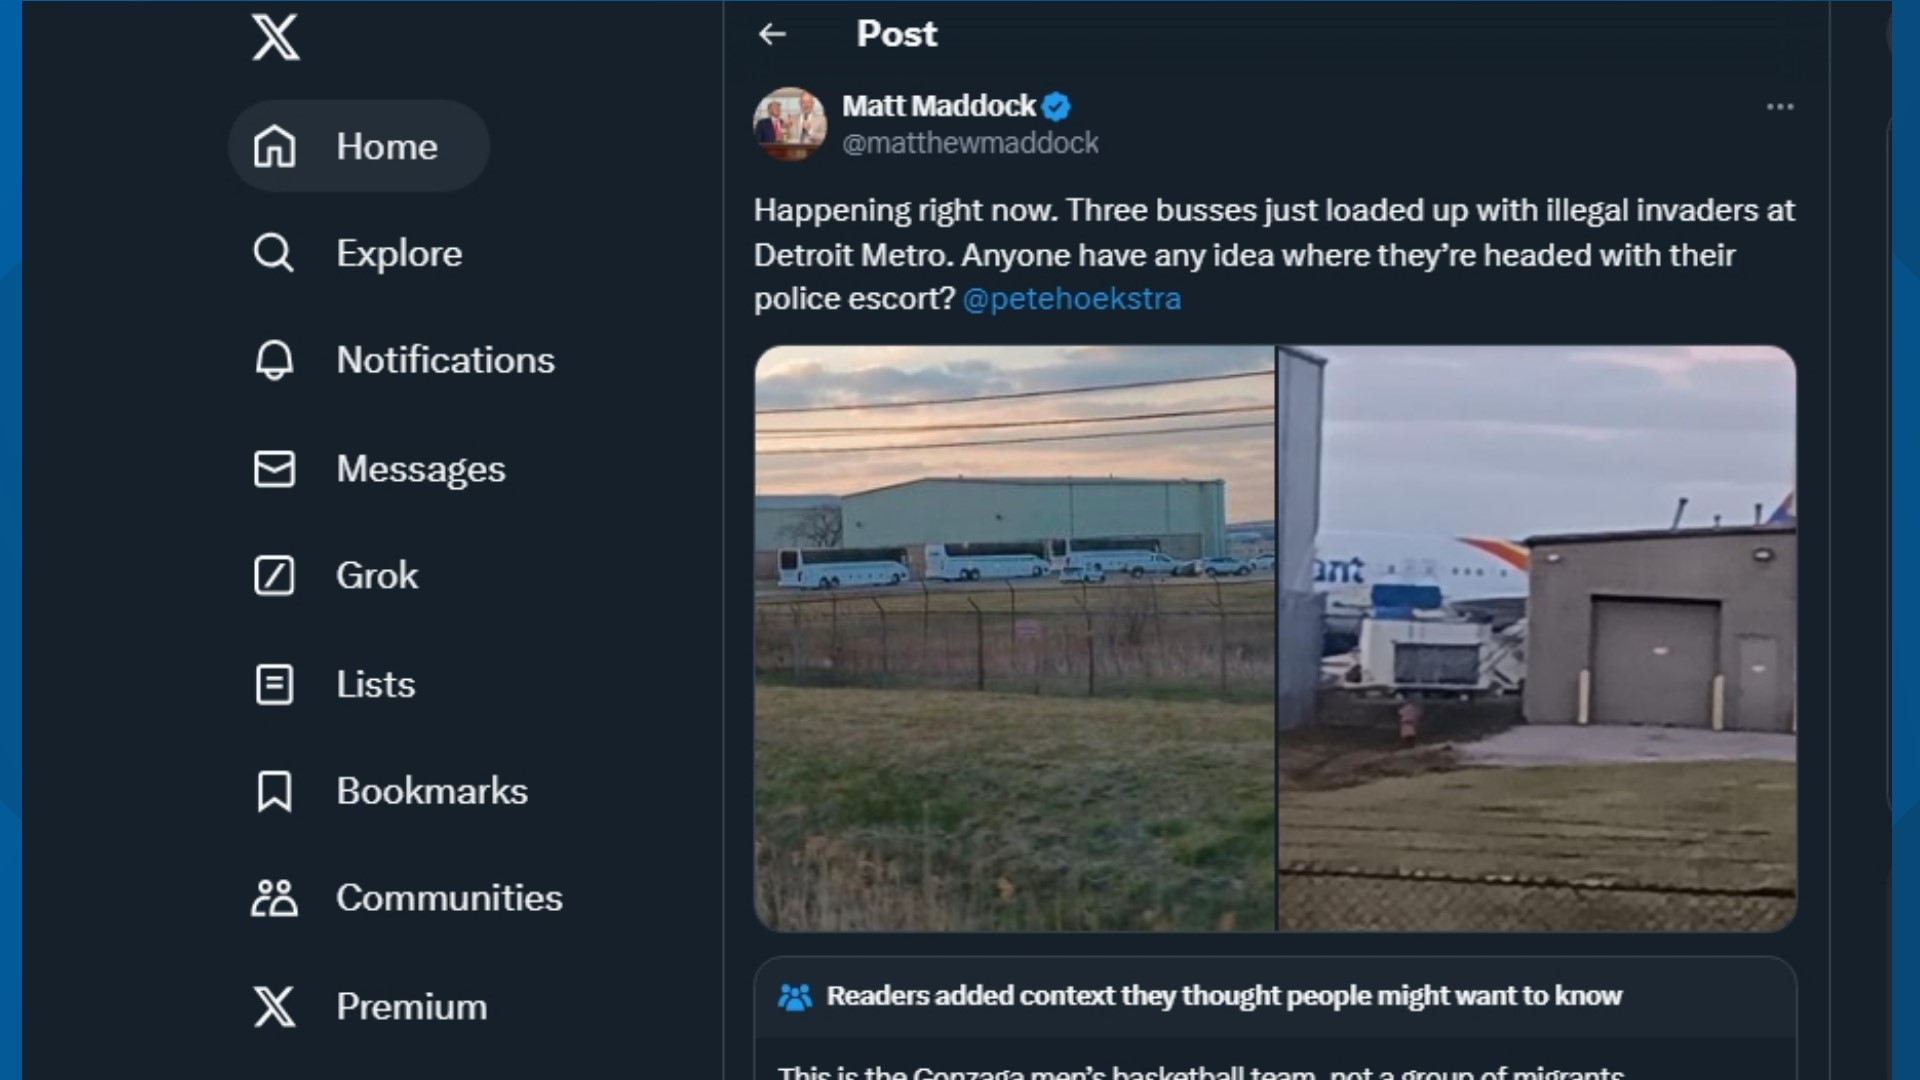 A spokesperson from the Detroit Metro Airport confirmed the buses in the tweet were transporting the NCAA basketball teams and their staffs.